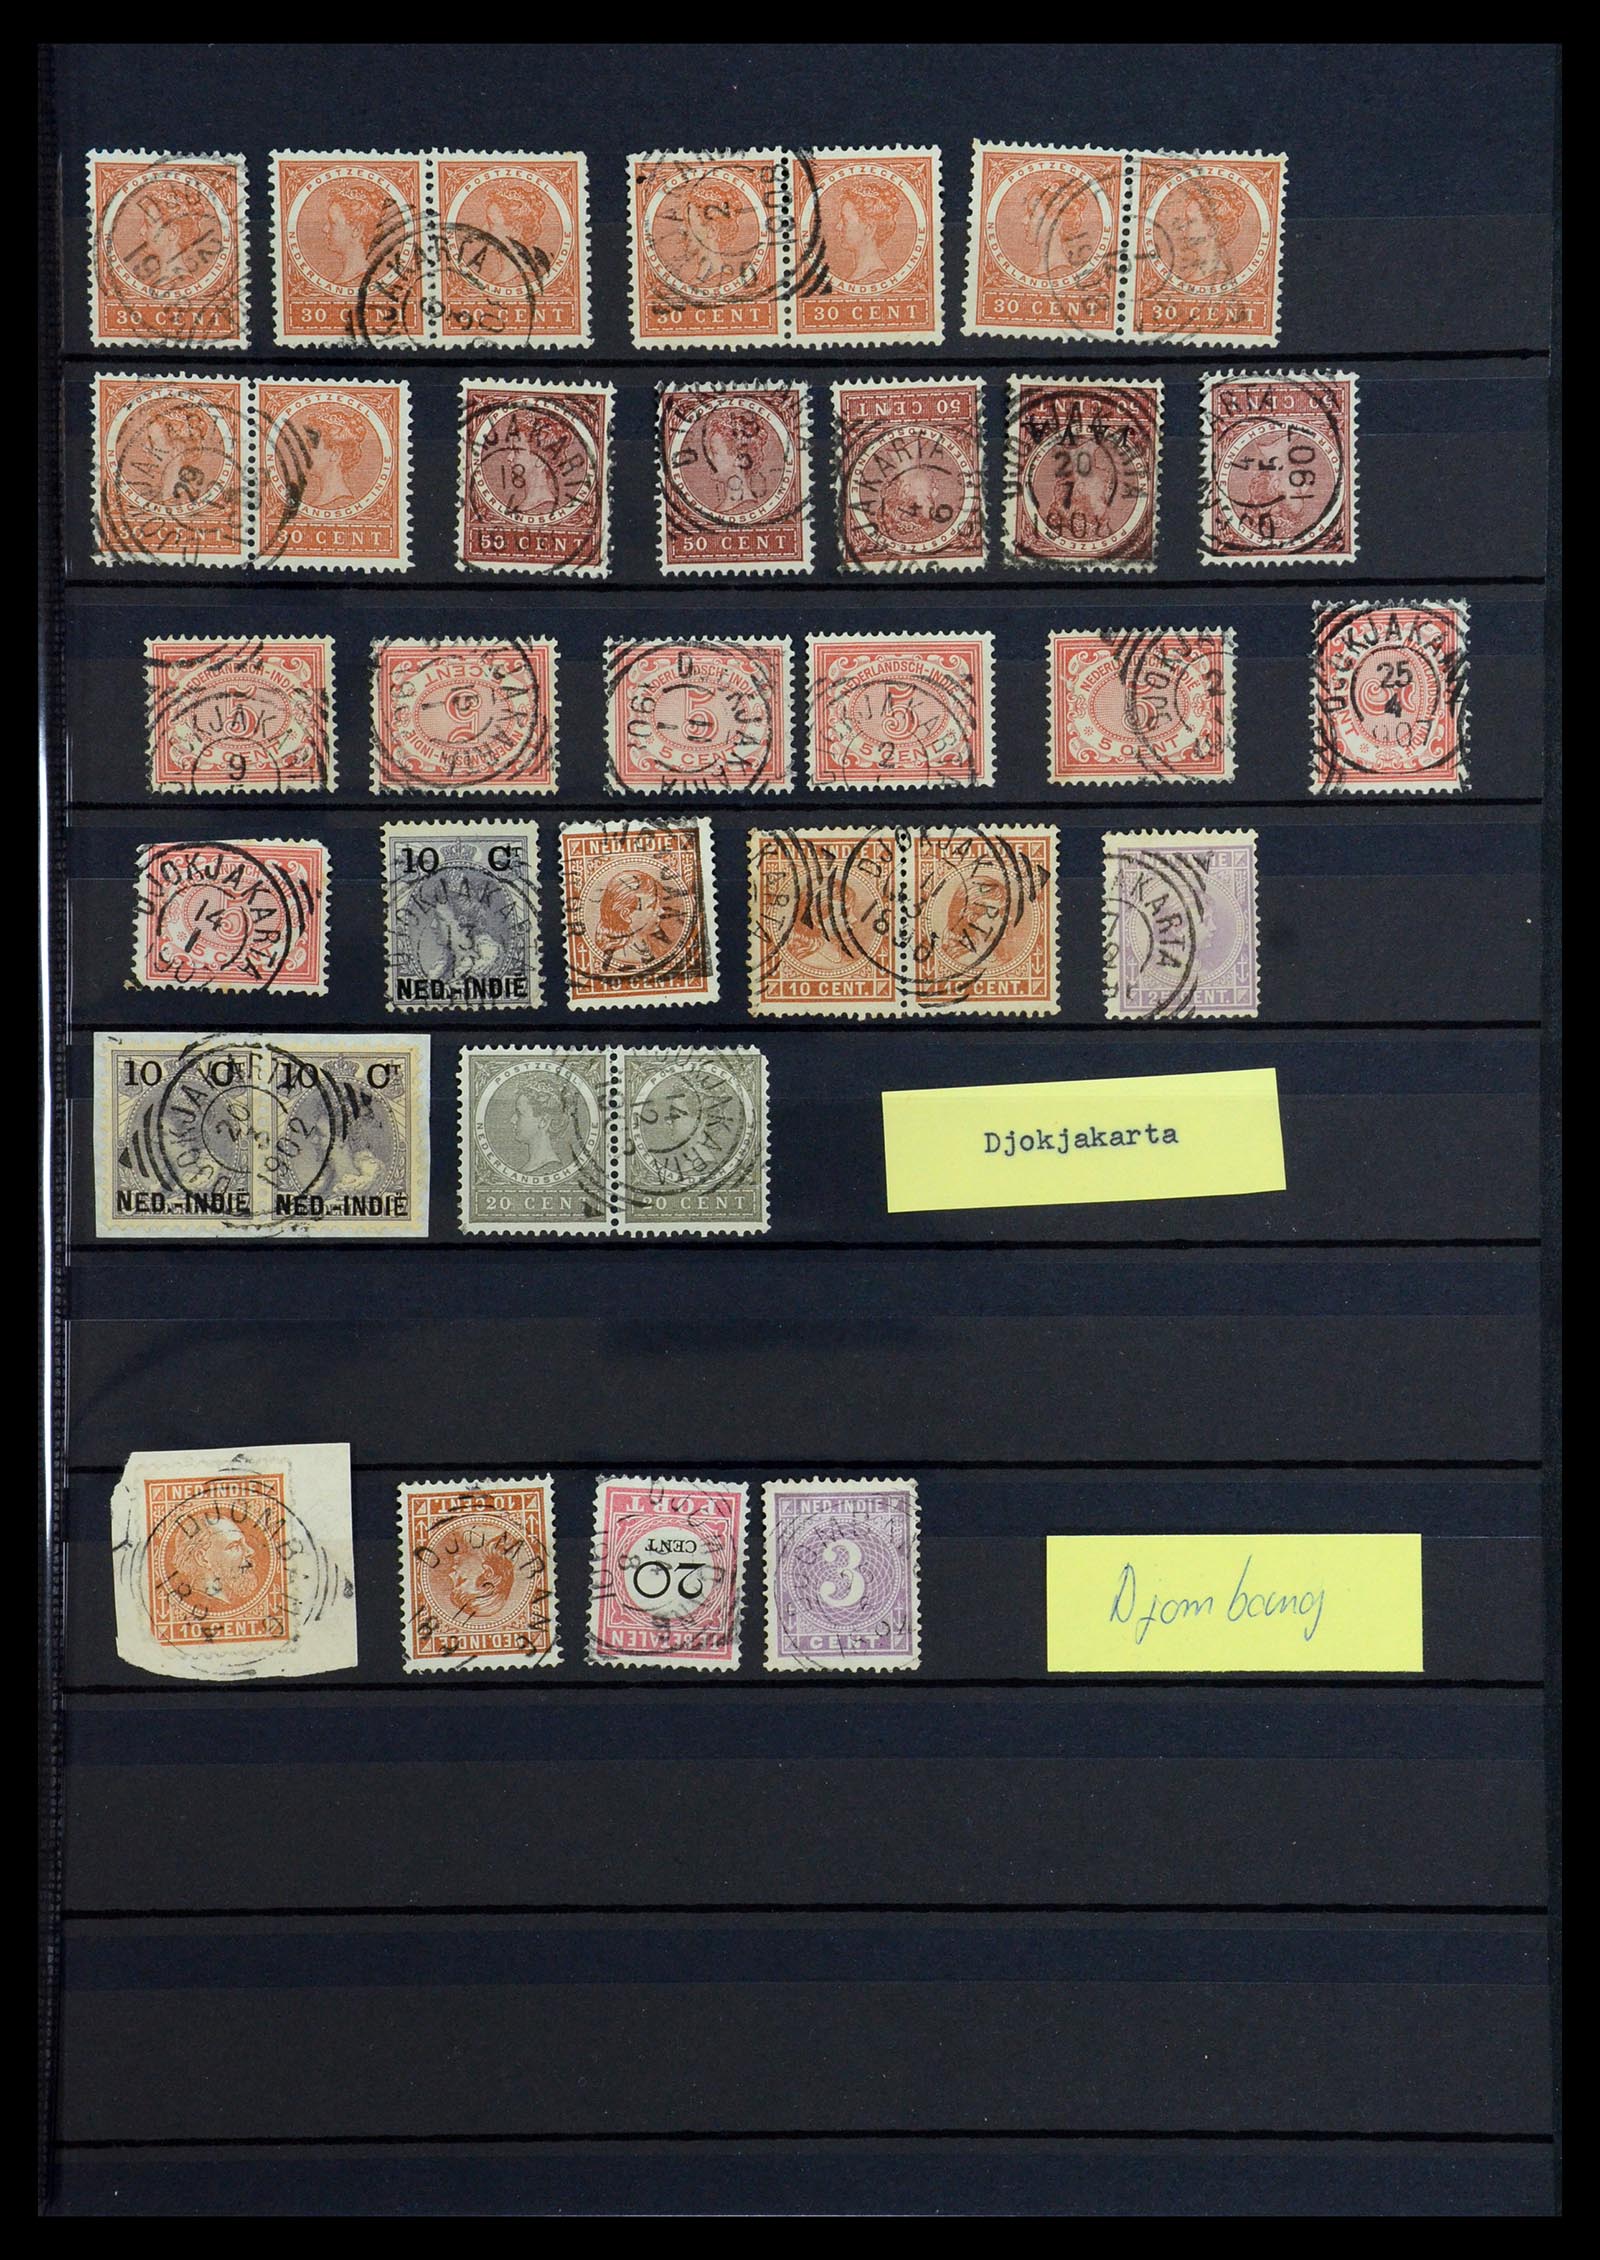 36371 015 - Stamp collection 36371 Dutch east Indies cancels.